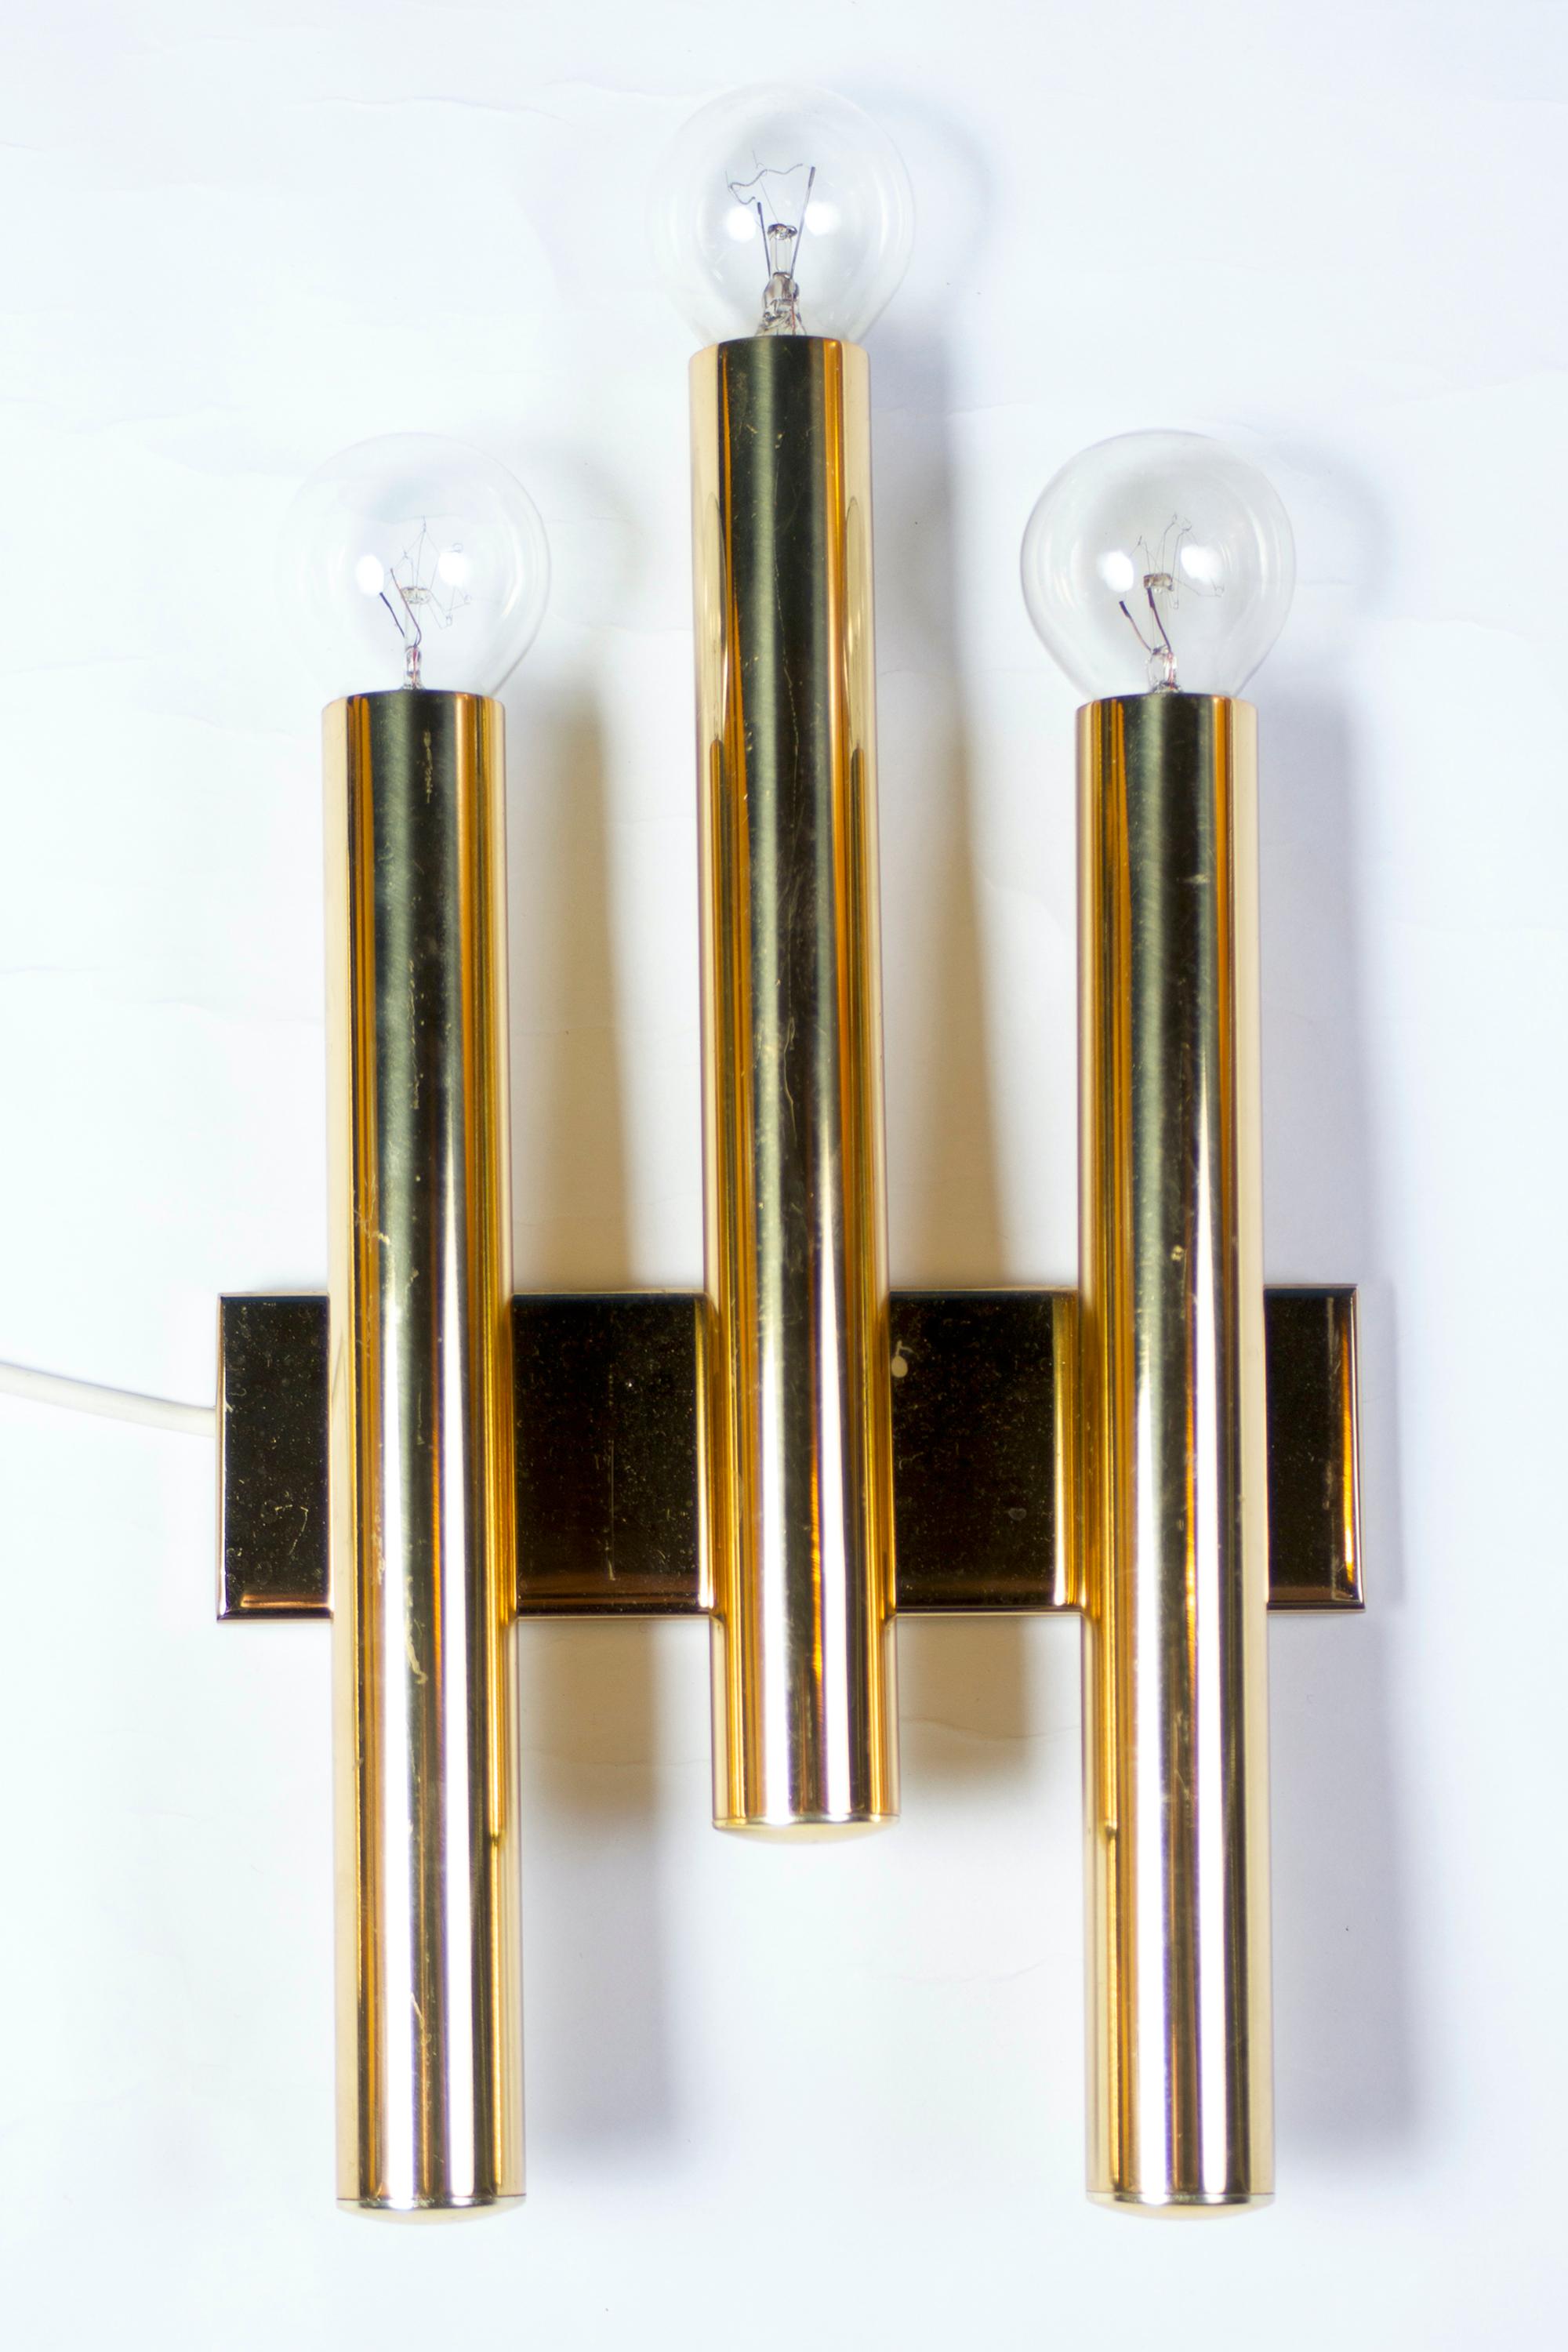 20th Century Pair of Modern Brass Sconces Attributed to Gio Ponti 1970 For Sale